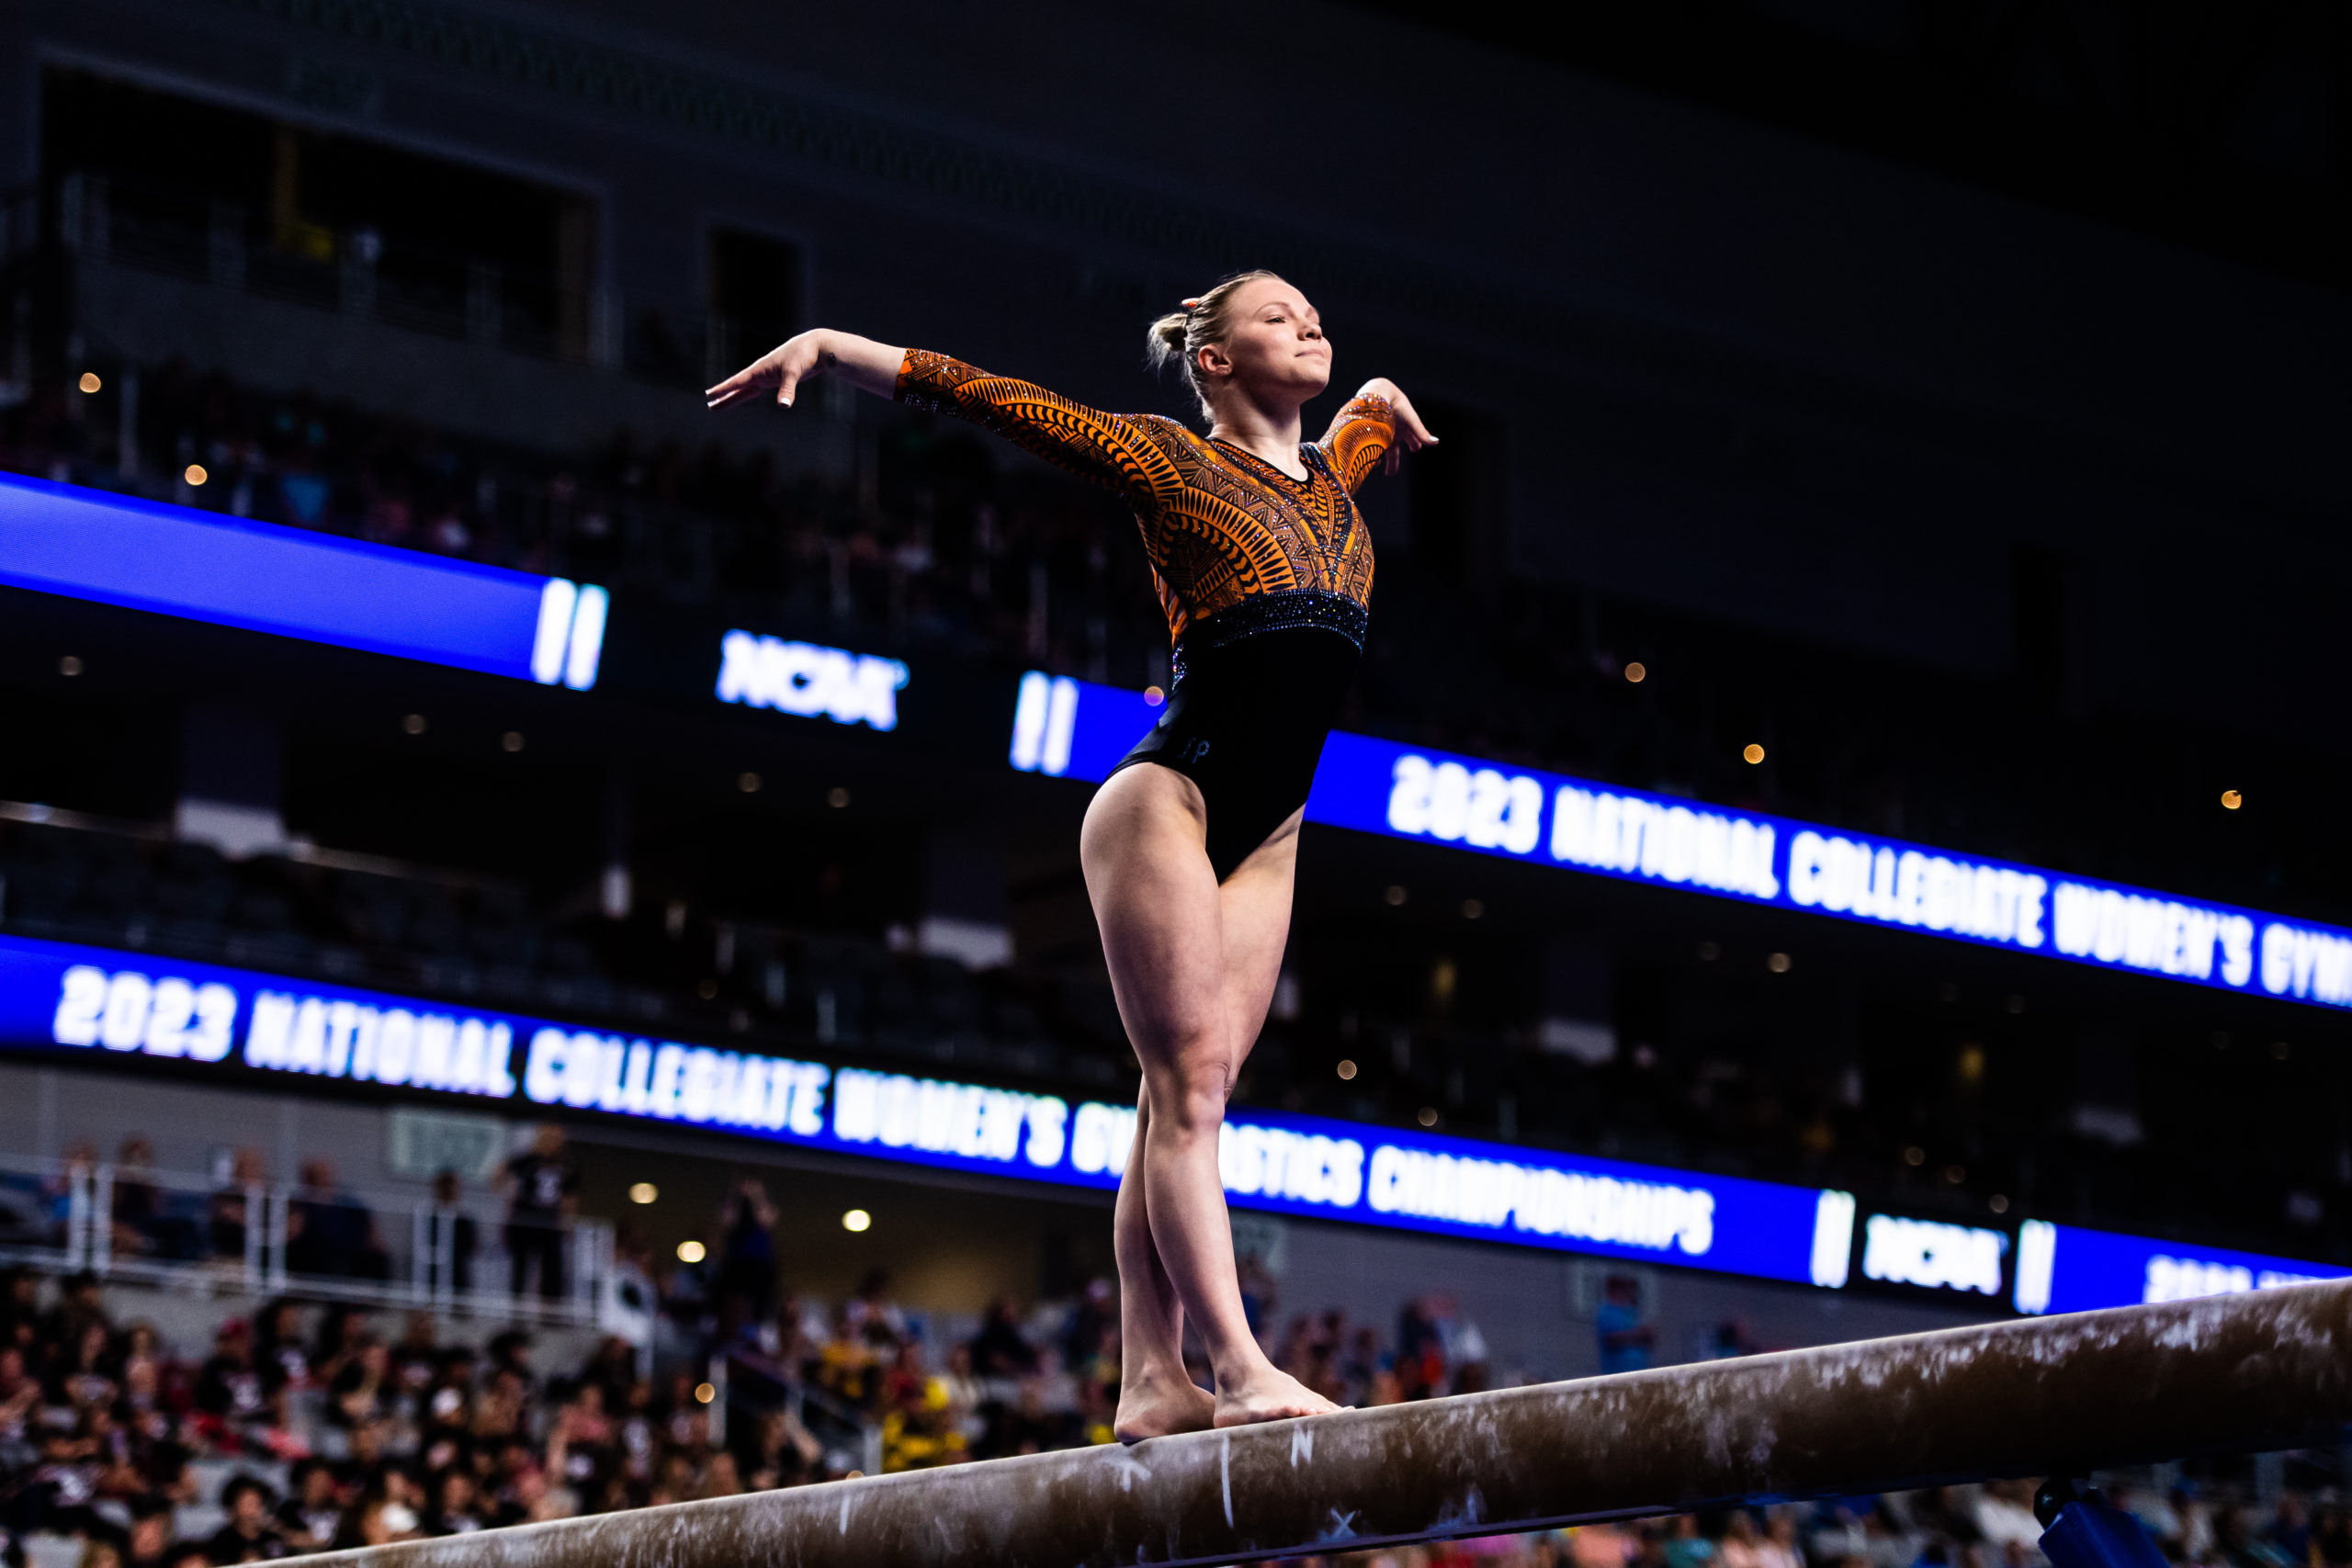 Oregon State's Jade Carey competes on beam during the second semifinal of the 2023 NCAA Women's Gymnastics Championships.